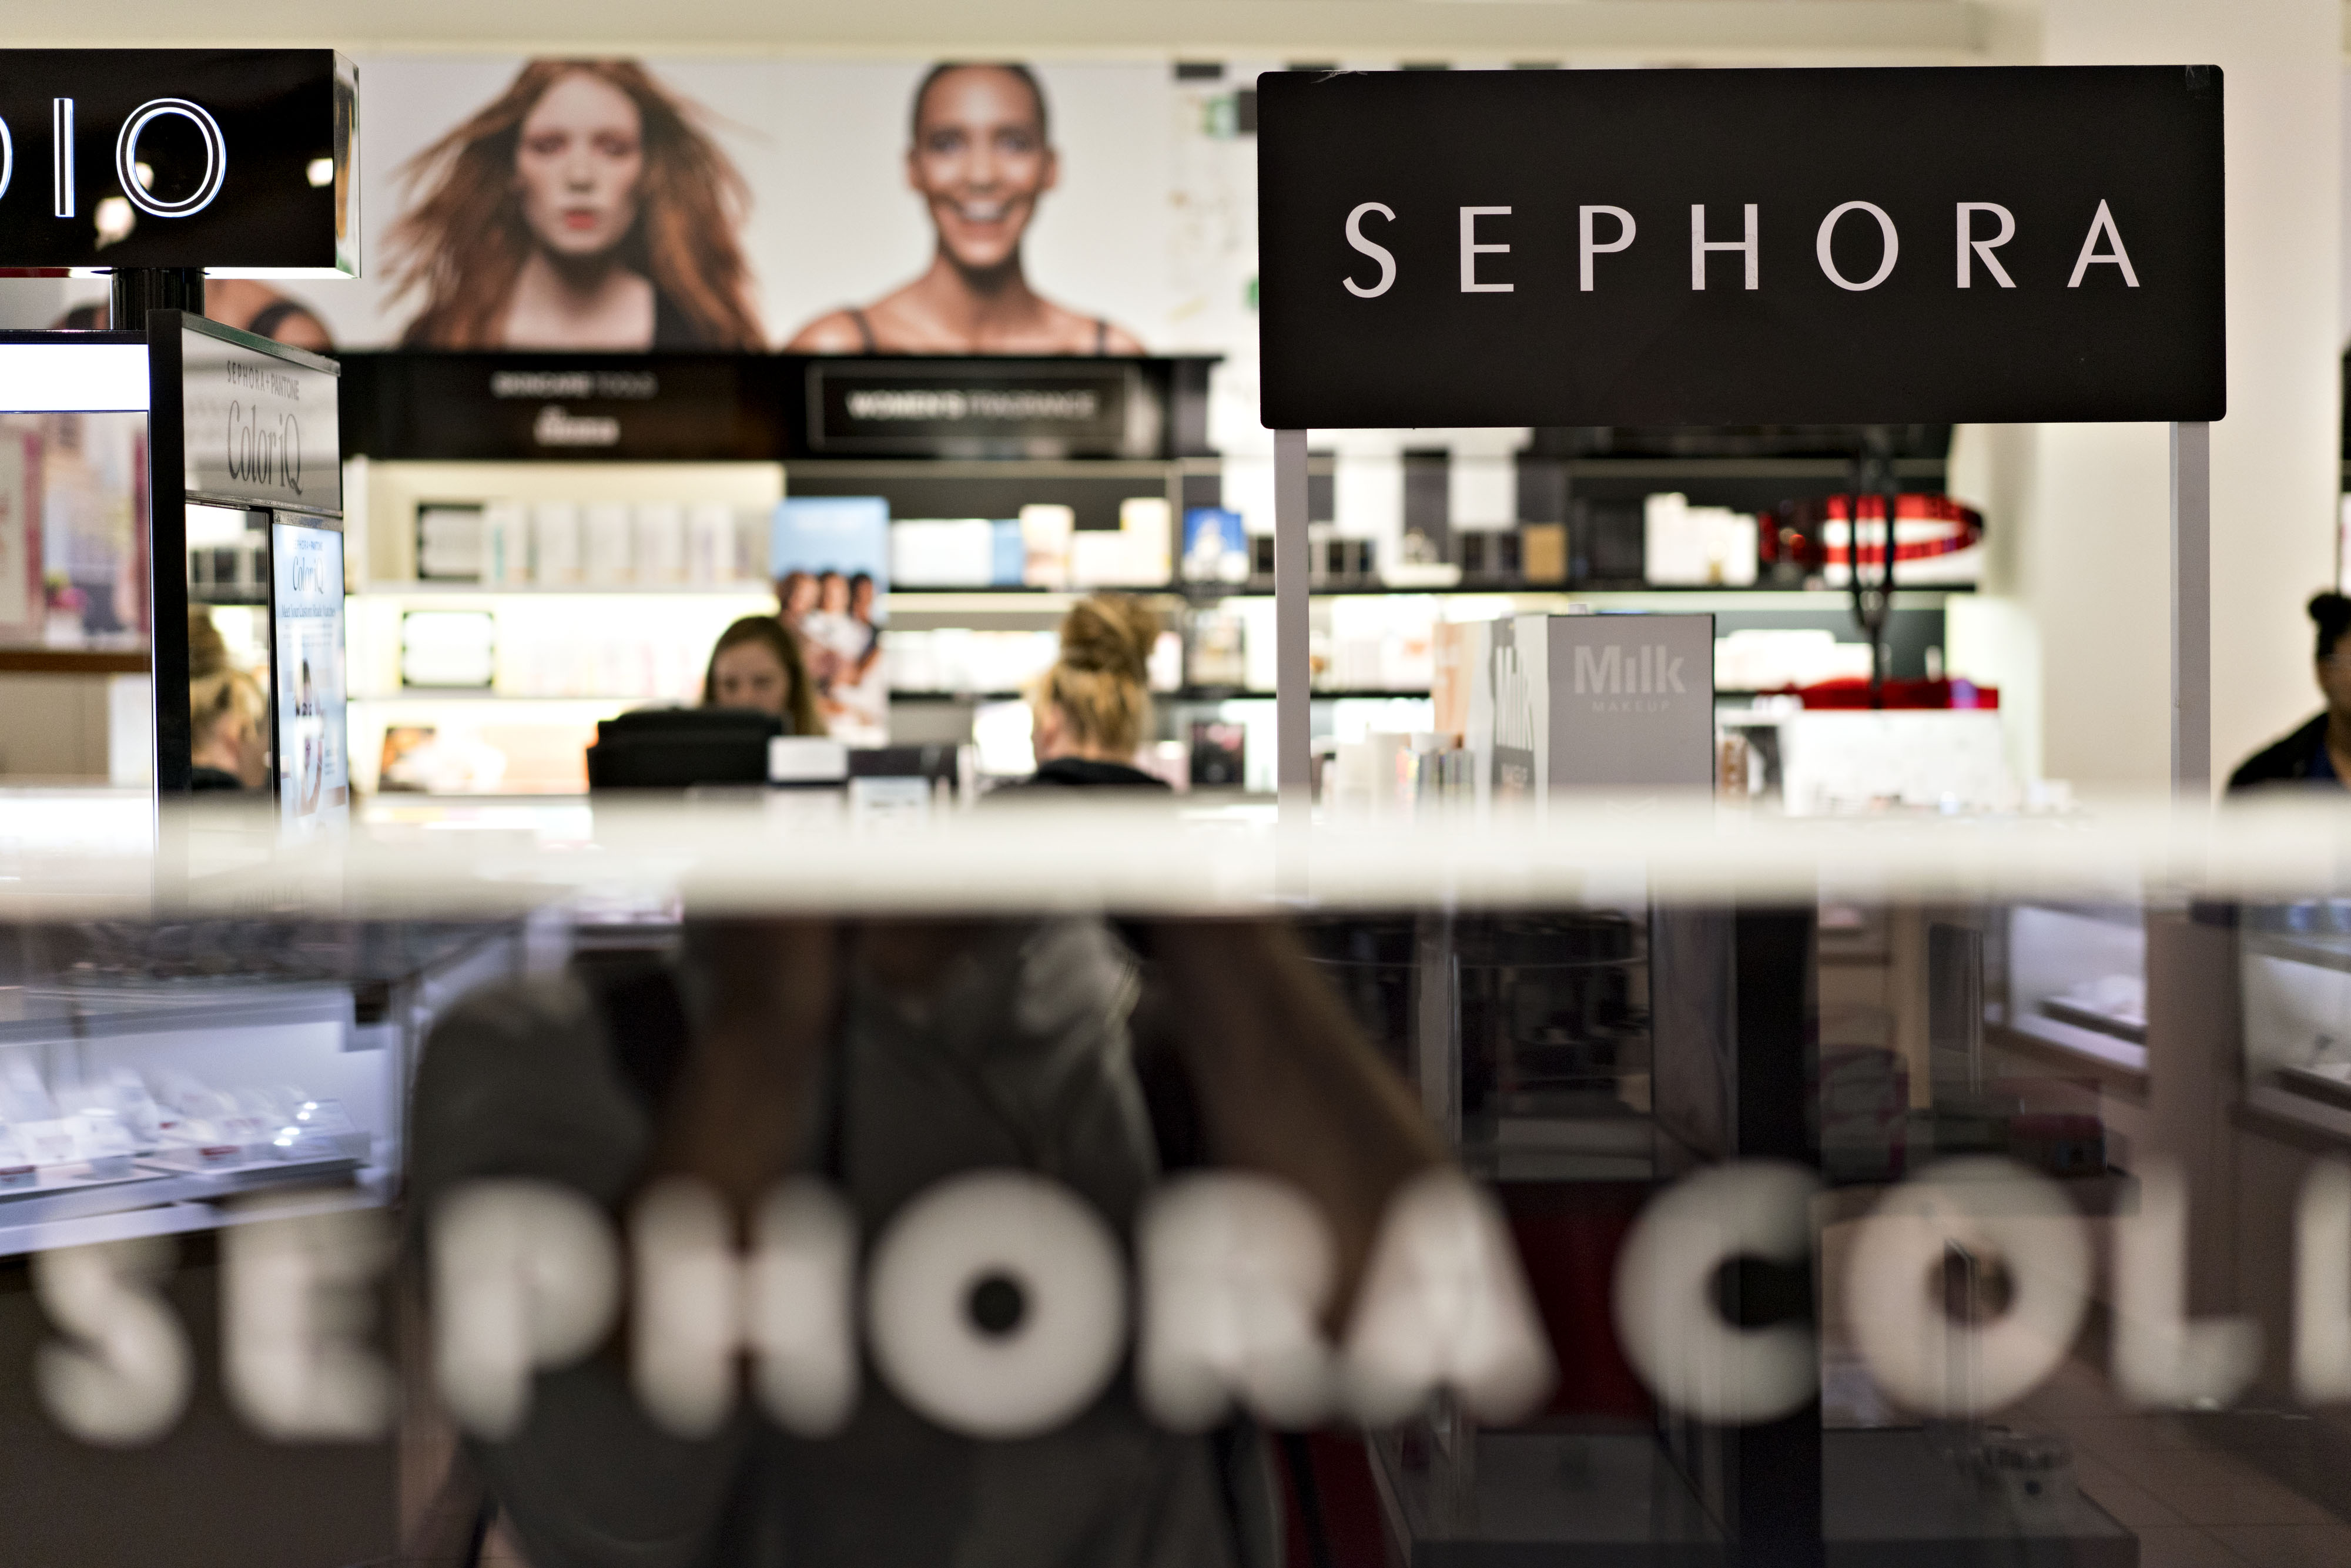 Sephora Fires Back at J.C. Penney in Bid to End Partnership - Bloomberg